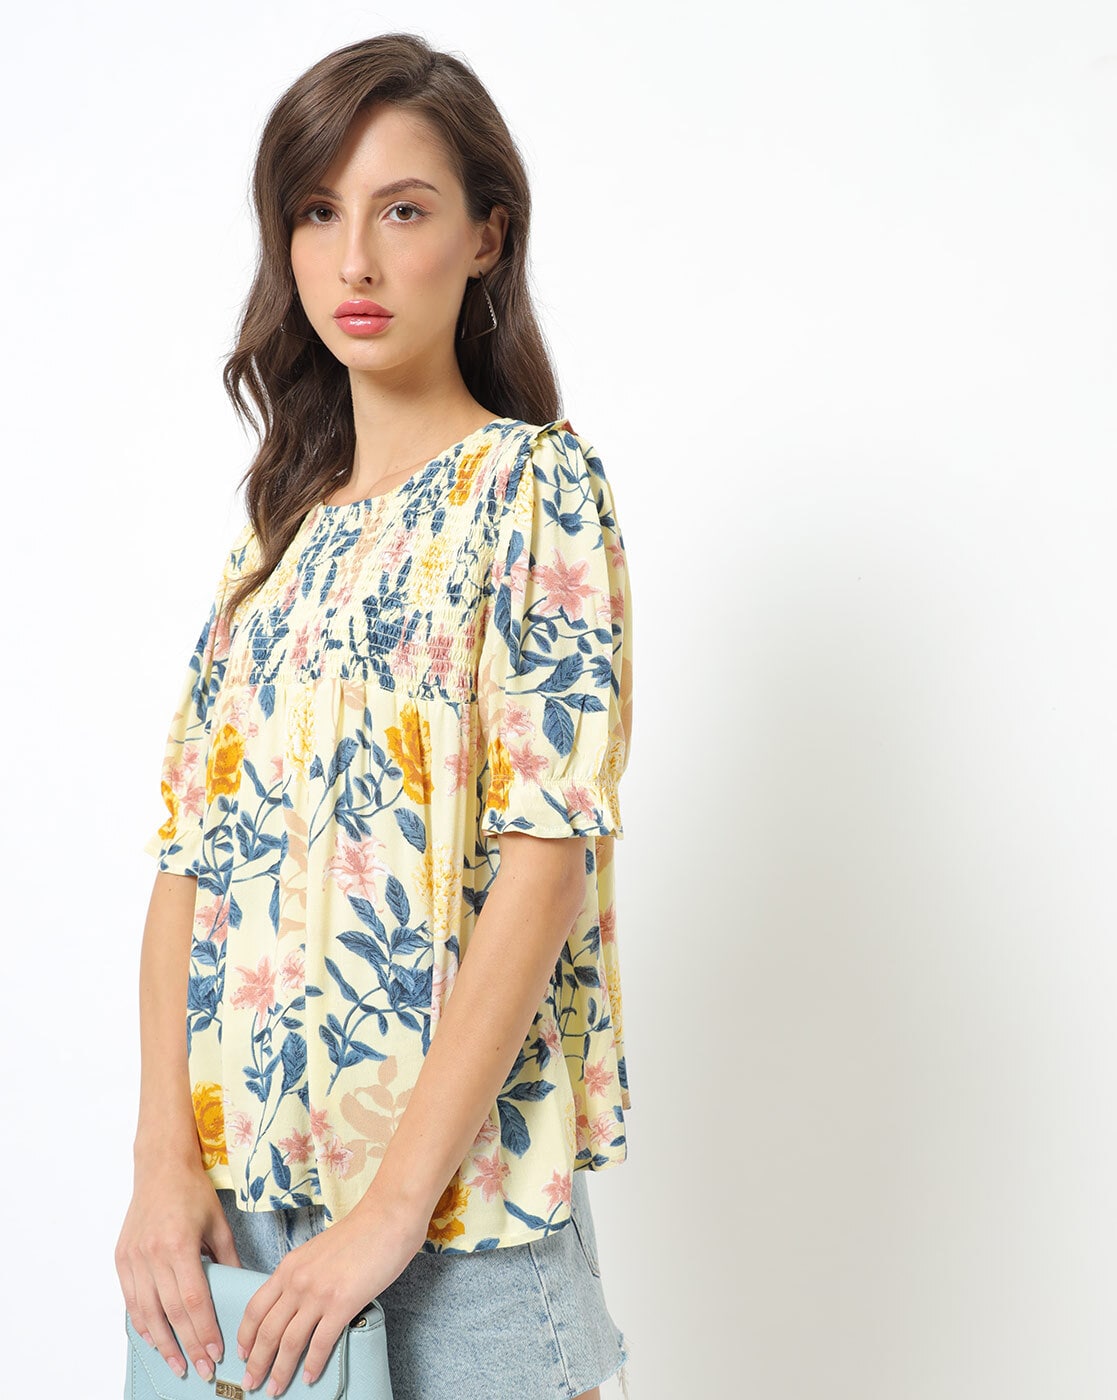 Spritz Printed Silk Blouse in Yellow Womens Tops P.A.R.O.S.H Save 42% Tops P.A.R.O.S.H 